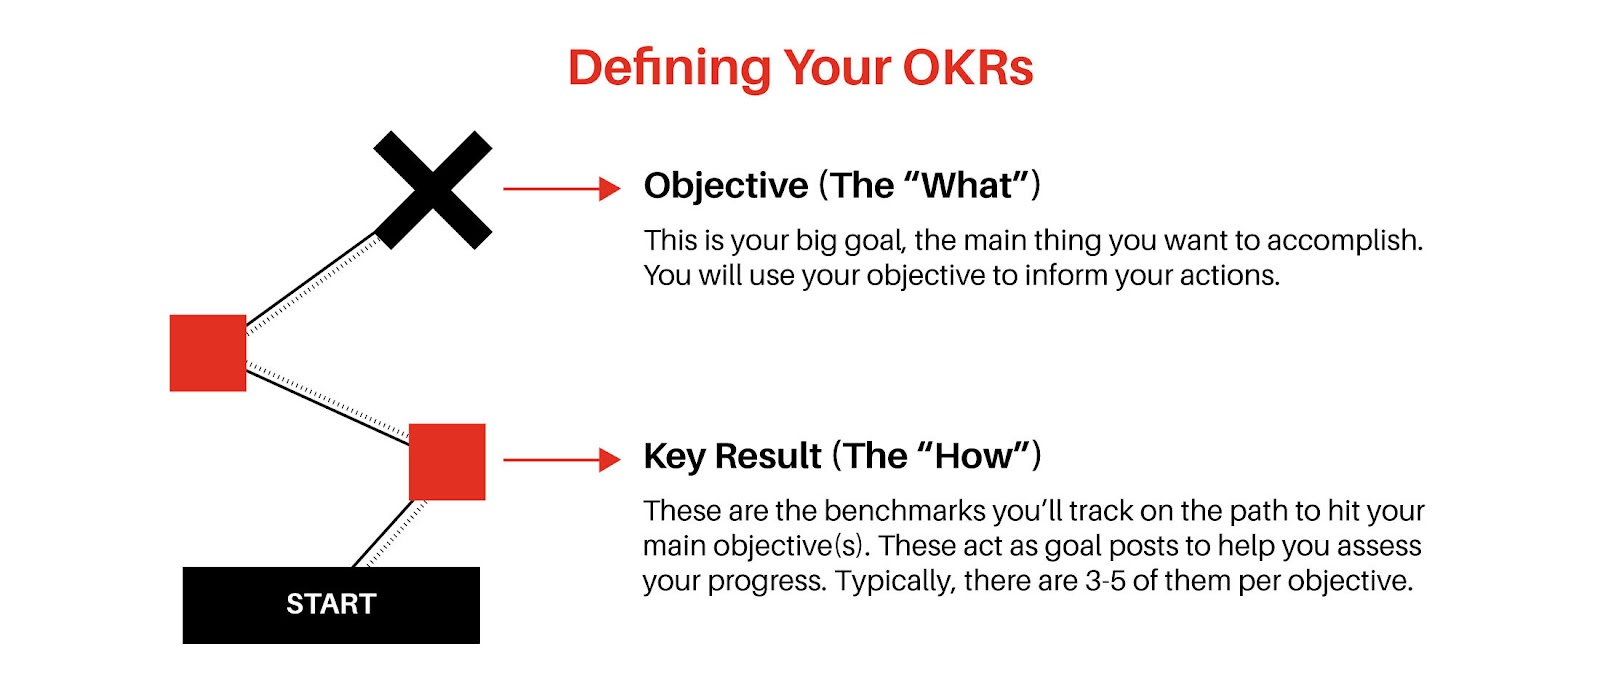 OKR vs. KPI: The KEY similarities and differences